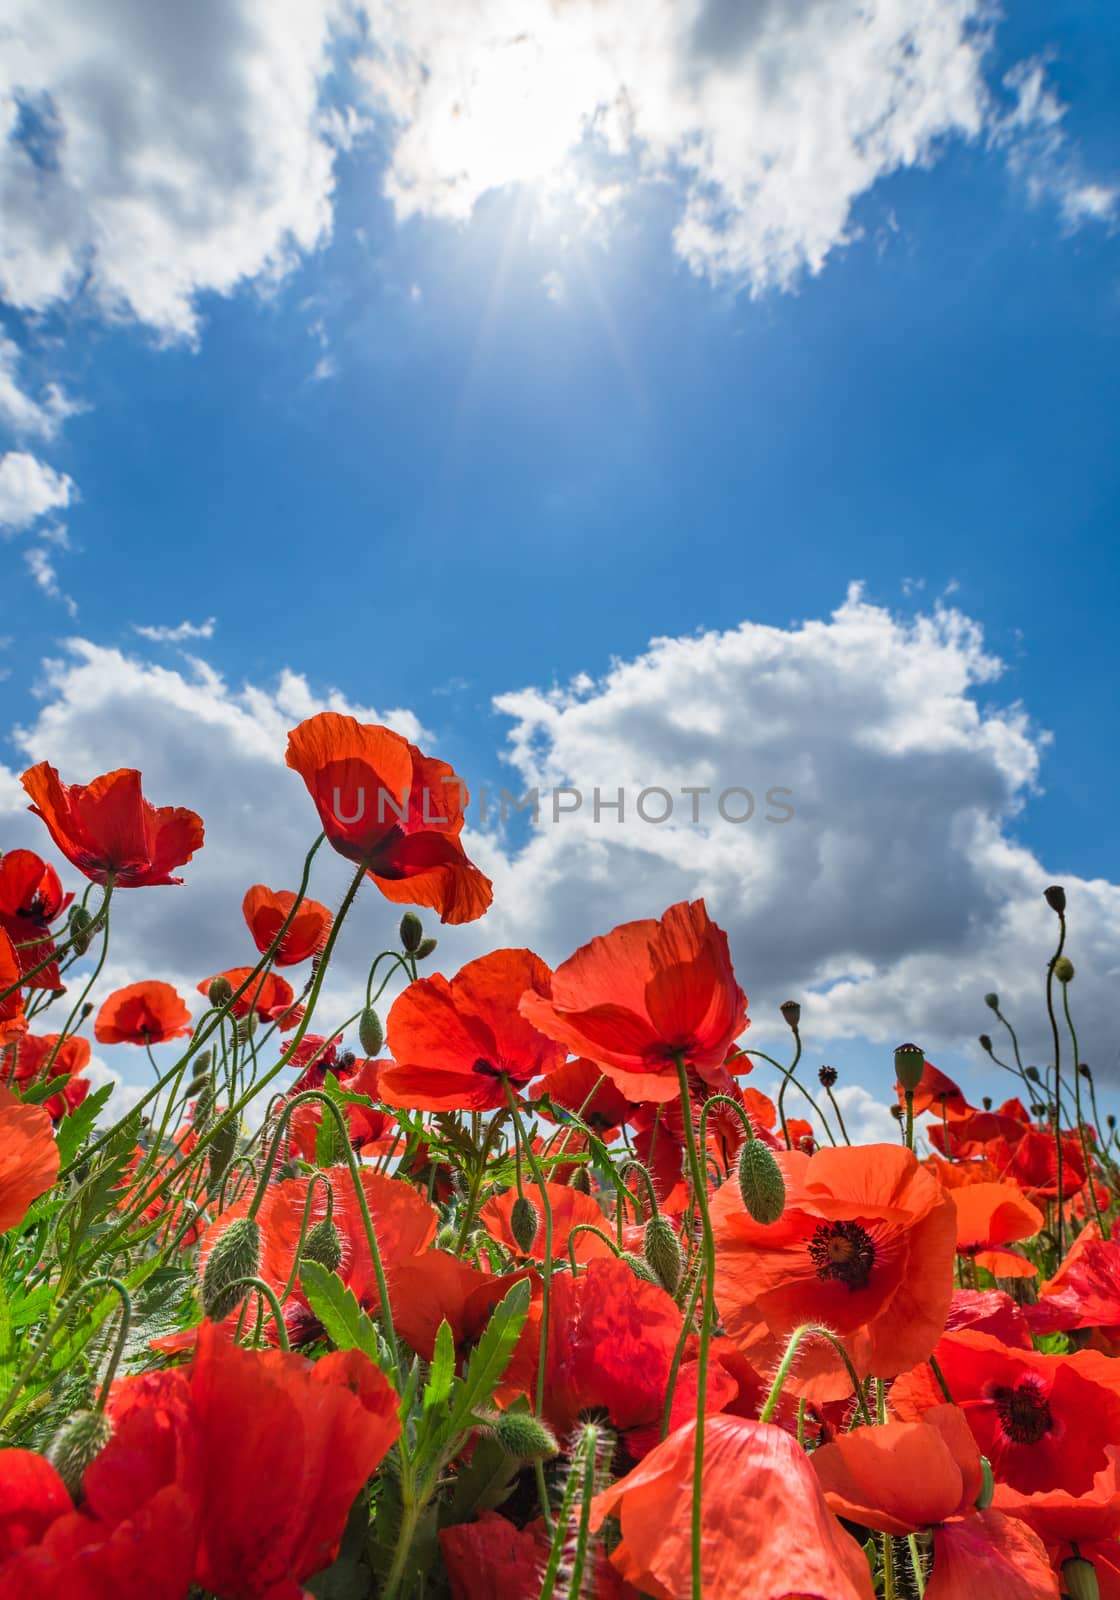 Red poppy field flowers with sunrays on blue cloudy sky by Vulcano